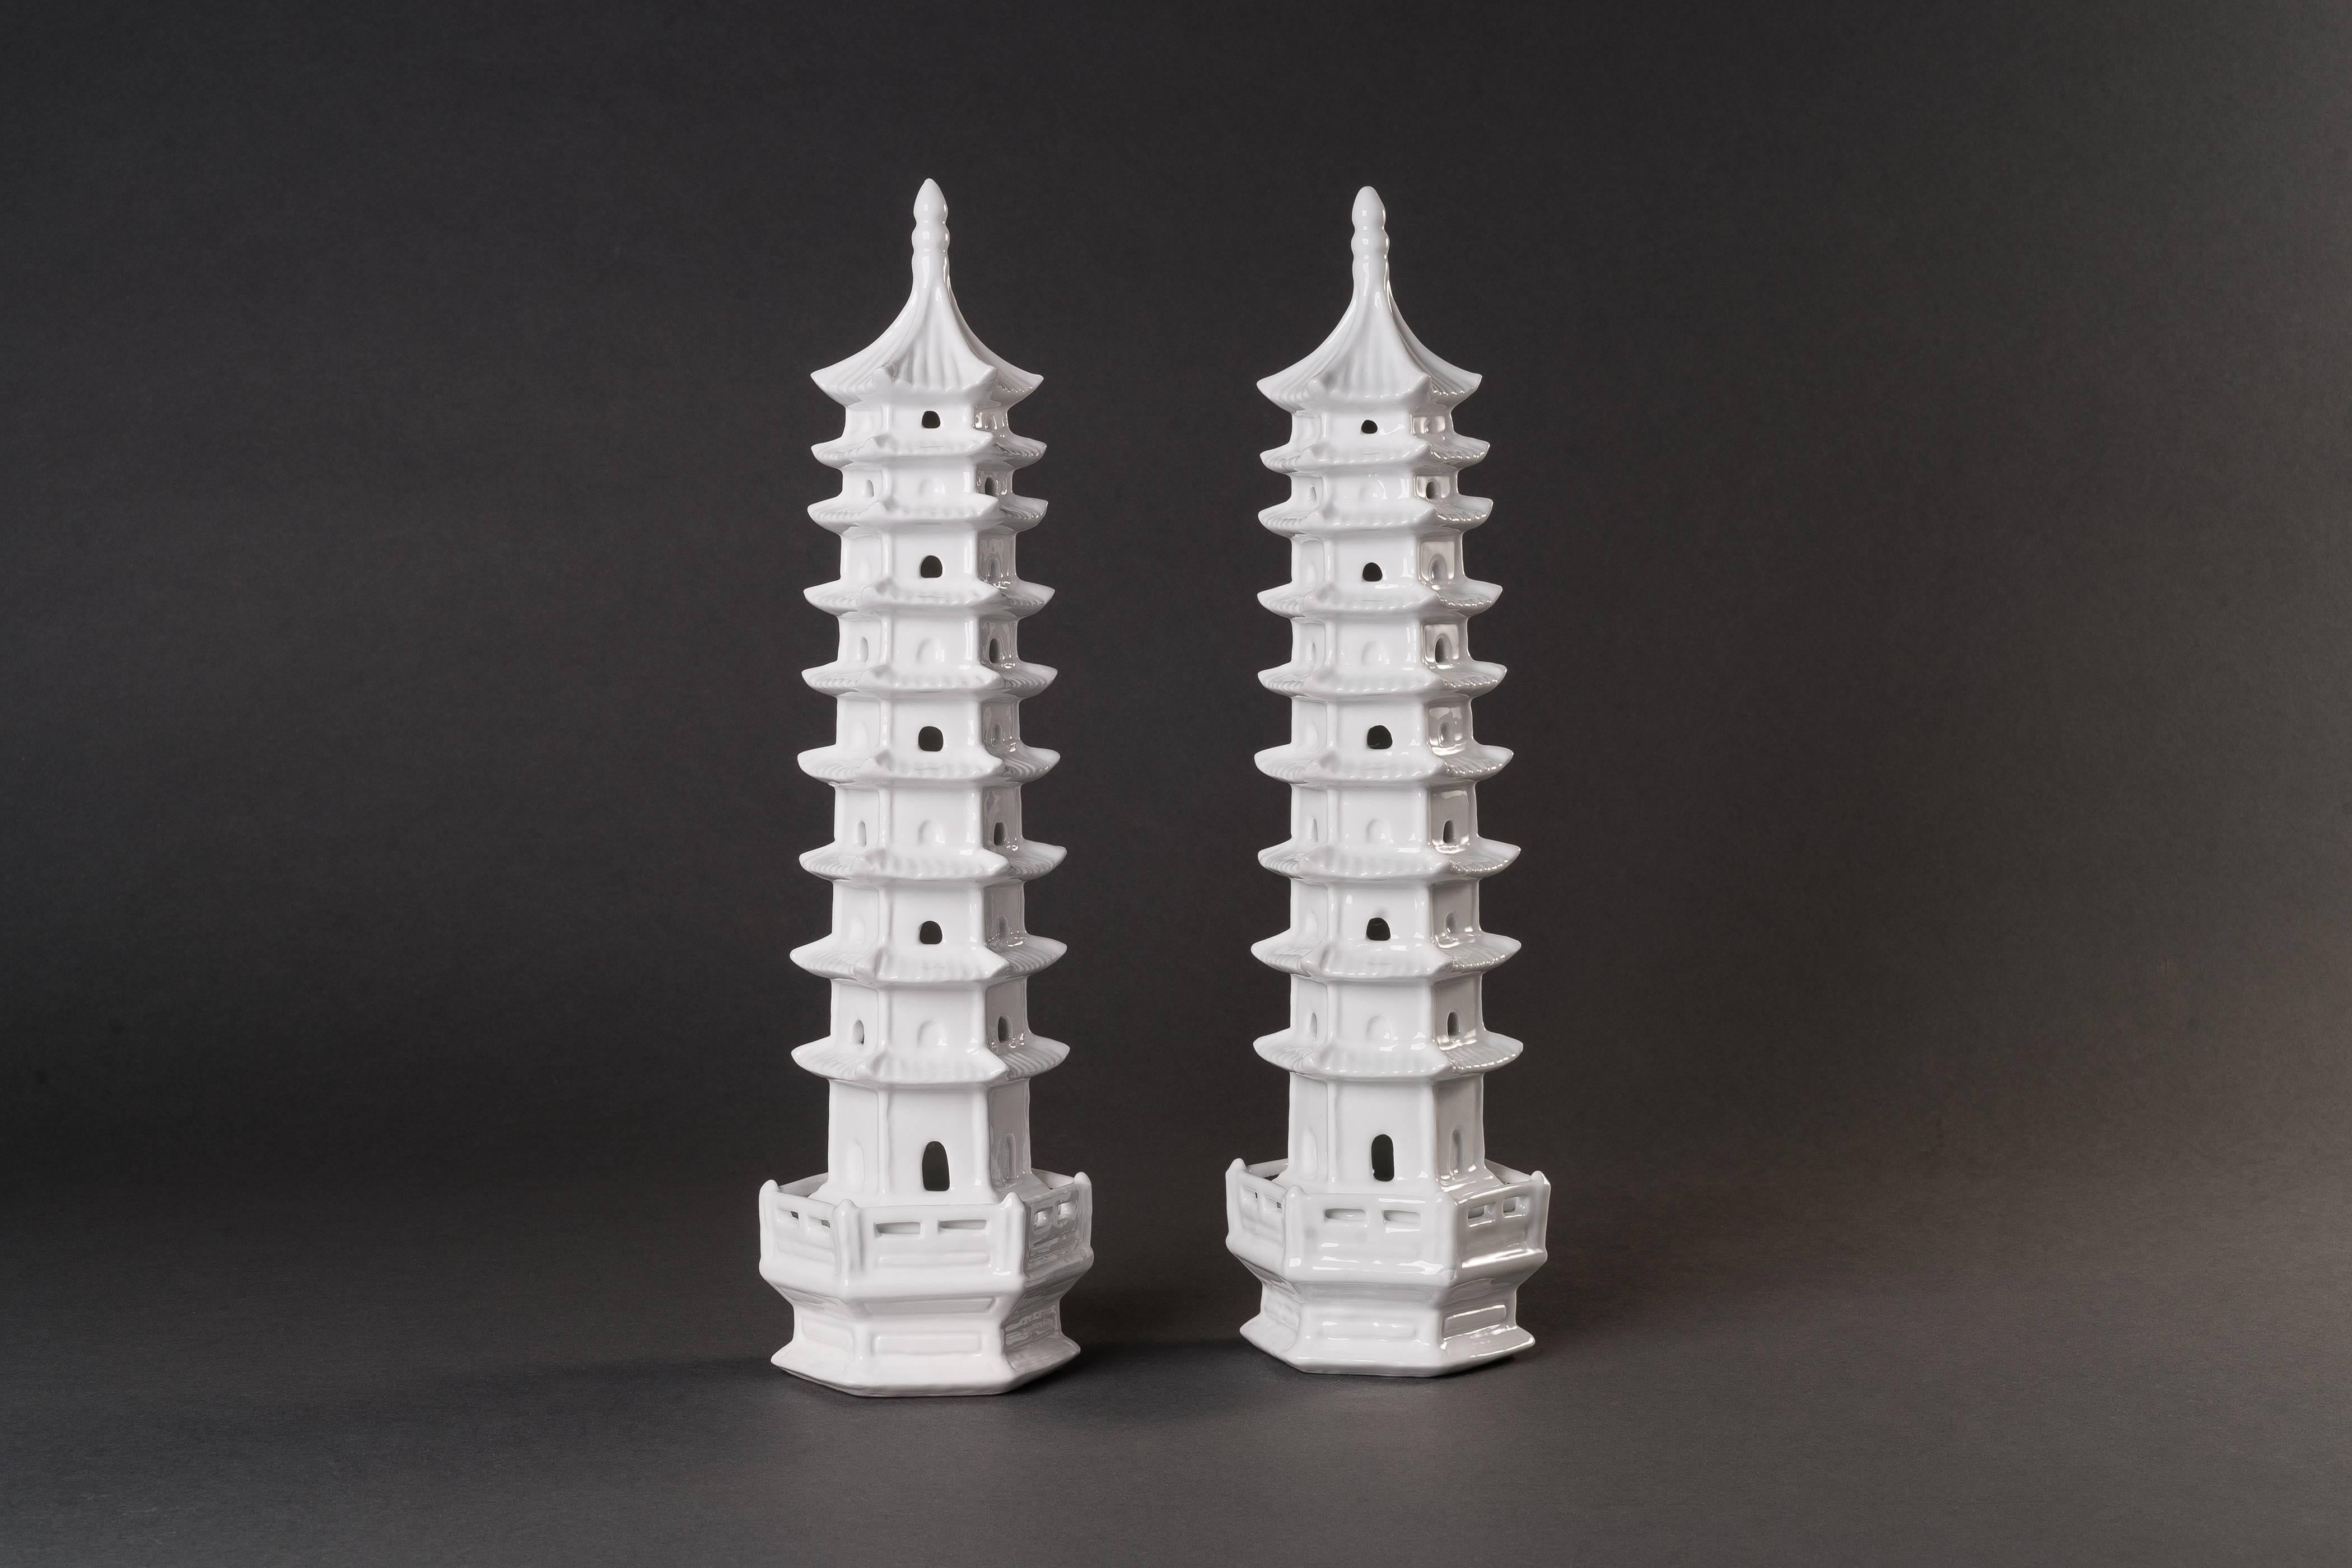 The set comprises of three pairs of white porcelain Blanc de Chine pagodas of different sizes and shapes.
Pagodas are a form of Buddhist architecture. Before Buddhism was introduced to China from India, there had been no pagodas in China. The